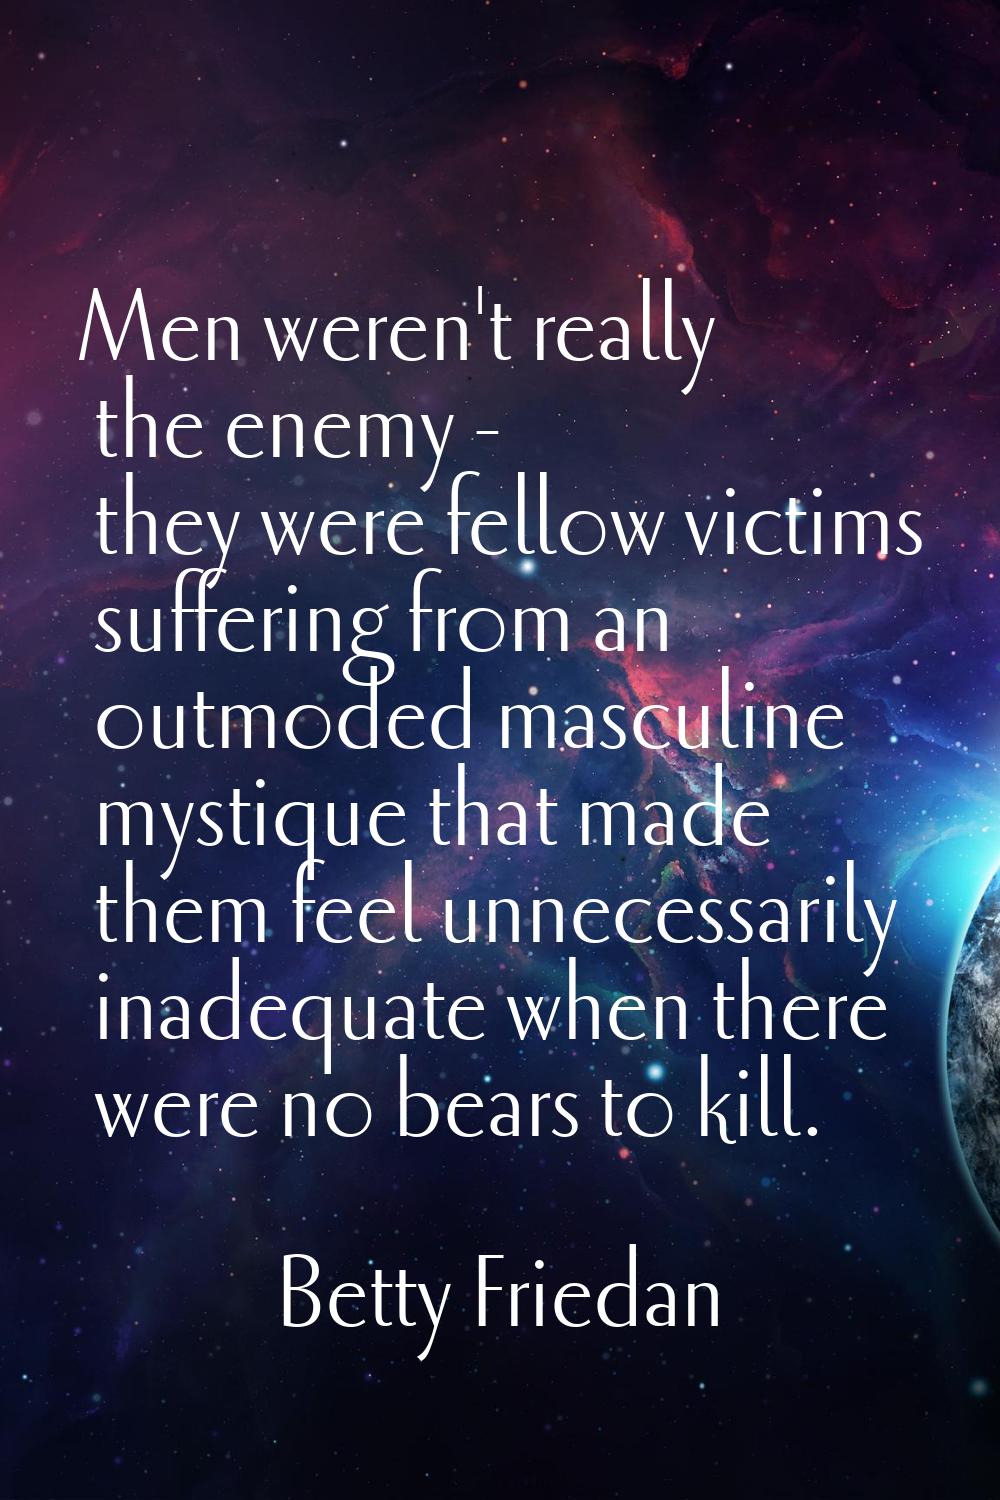 Men weren't really the enemy - they were fellow victims suffering from an outmoded masculine mystiq